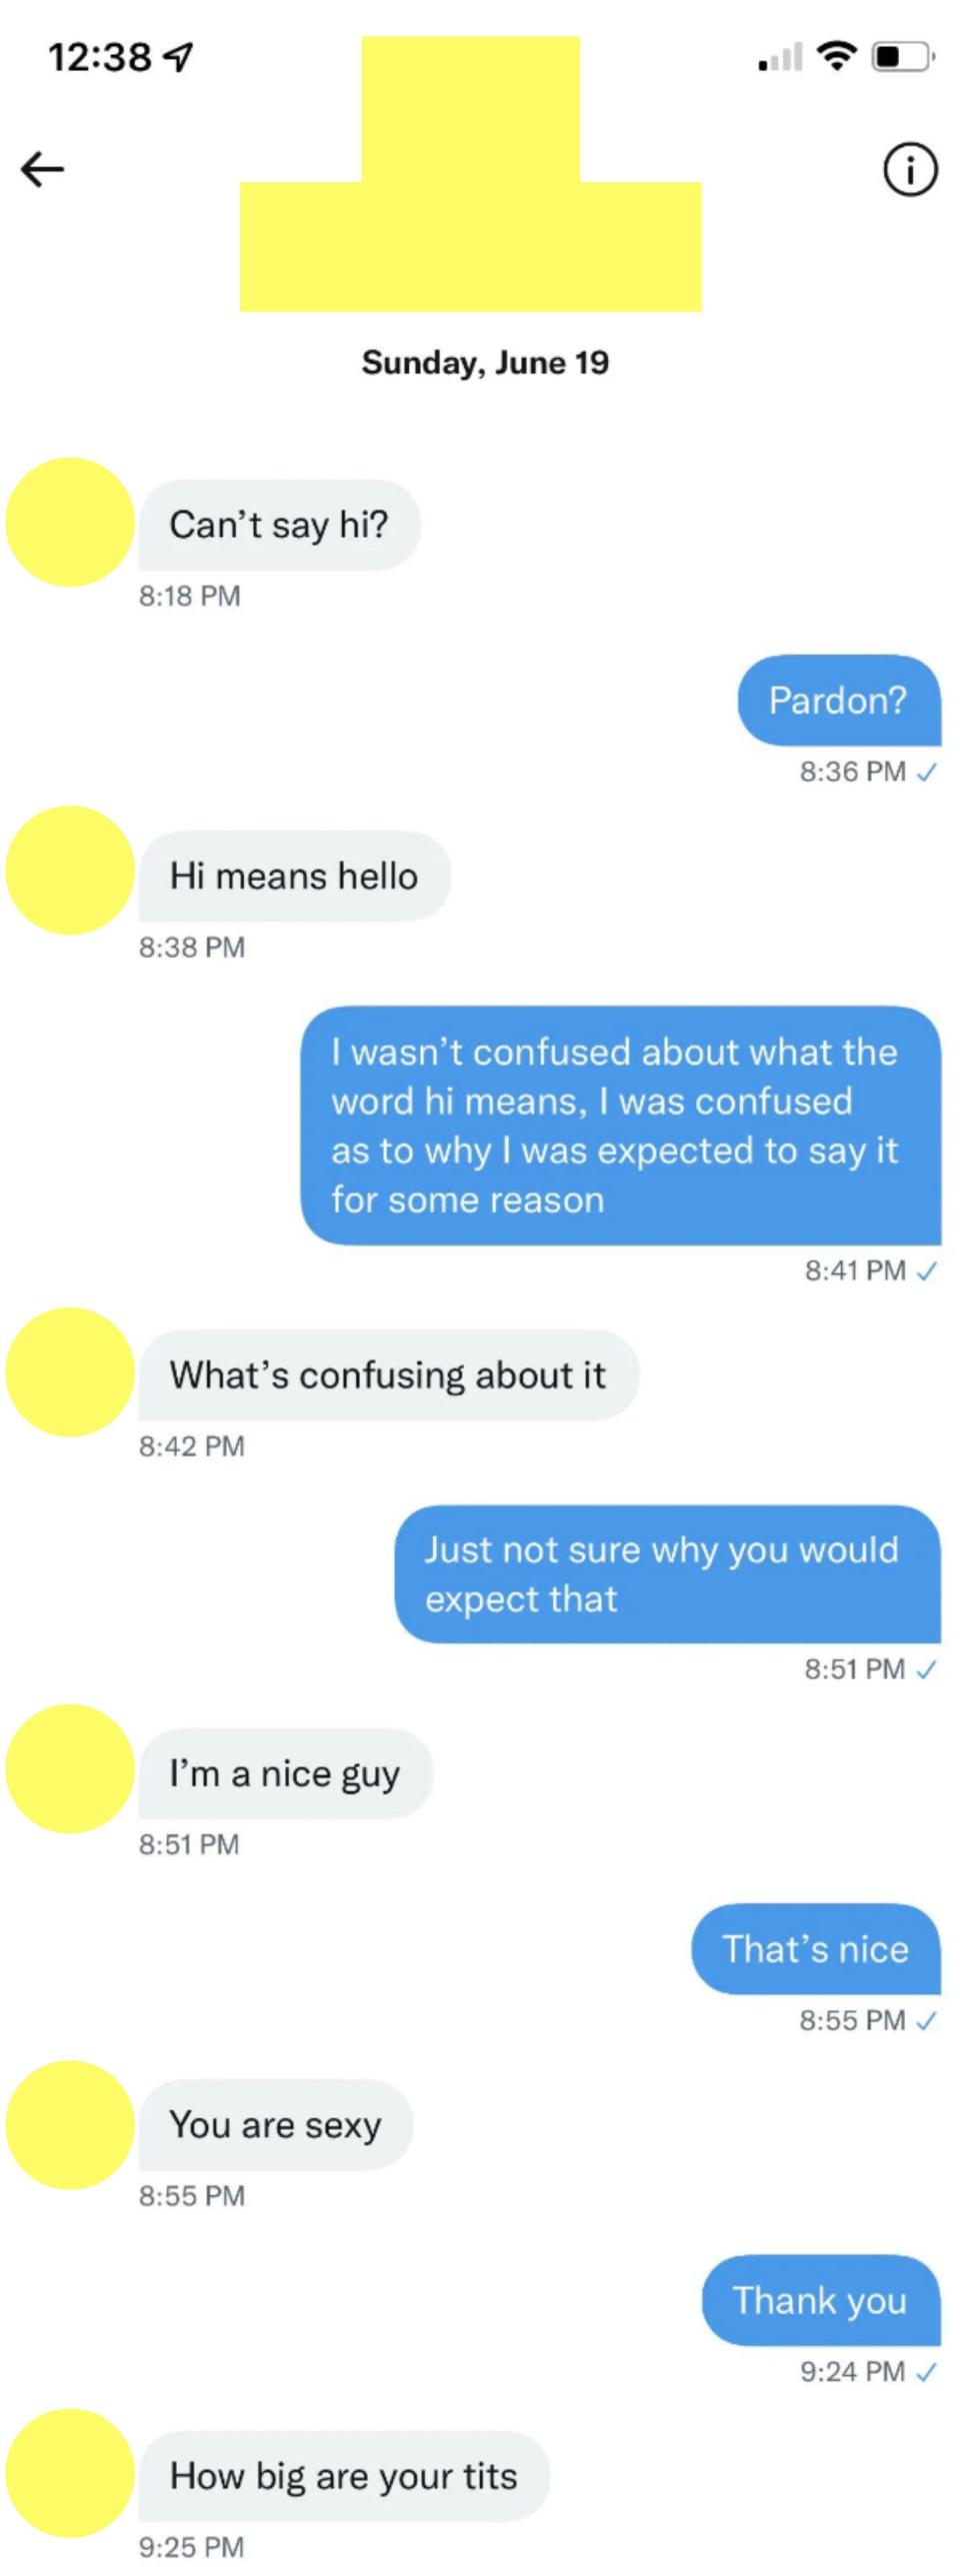 He says "Can't say hello?" and when she says she's confused as to why she's expected to respond, he says he's a nice guy, then says "You are sexy" and "How big are your tits"